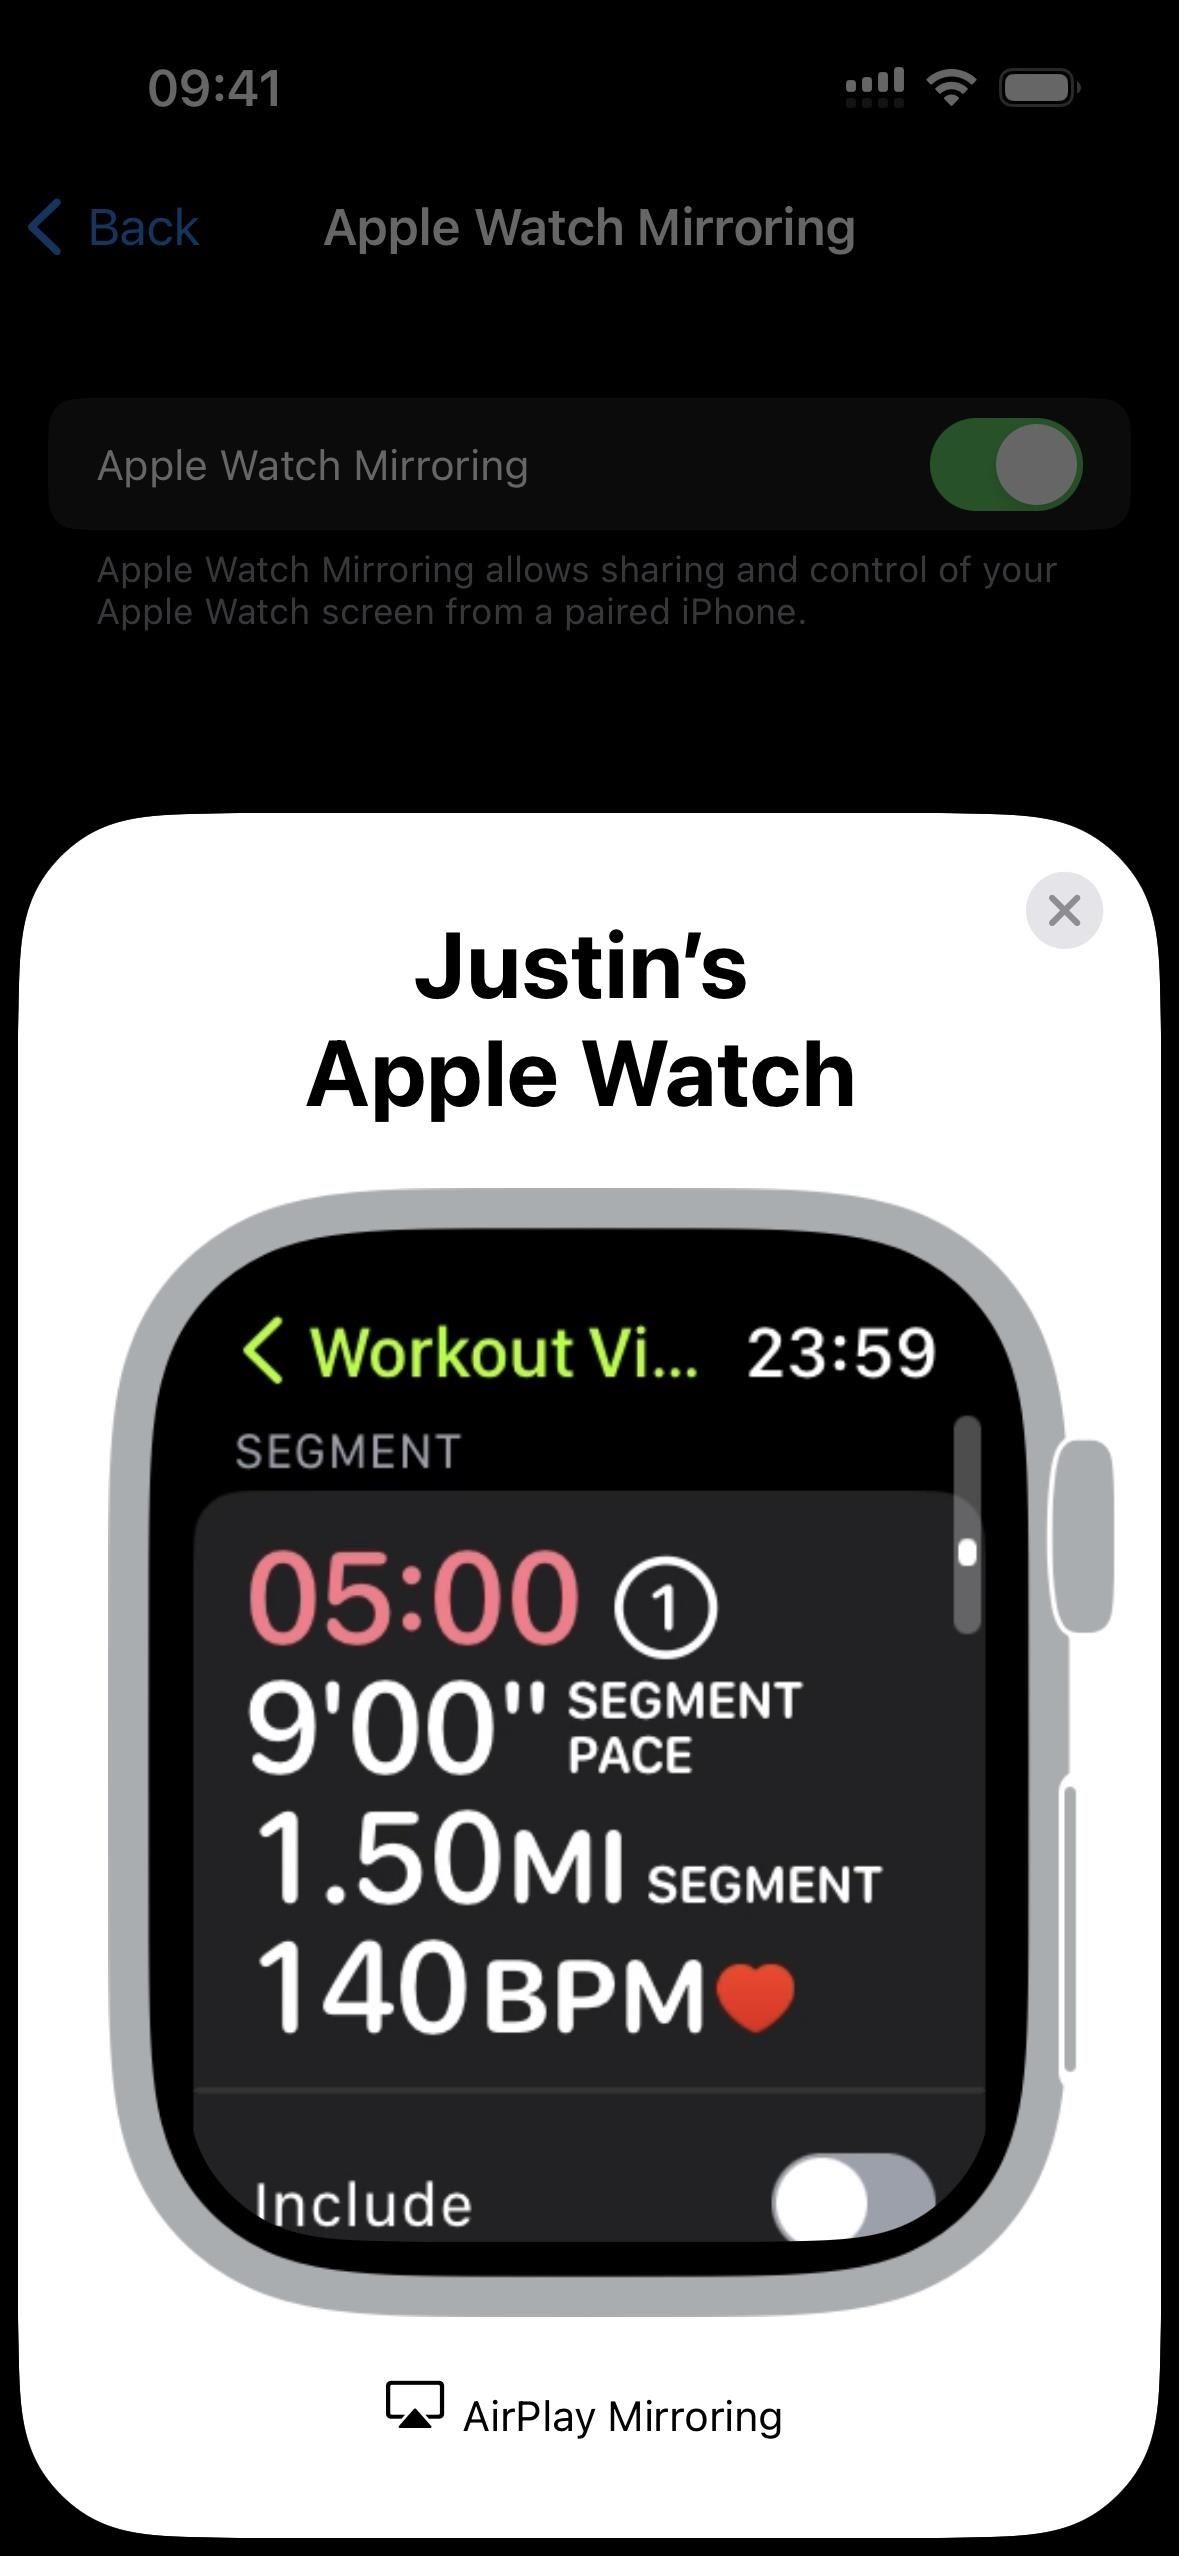 This New Apple Watch Feature Is More Useful and Important Than You Might Realize